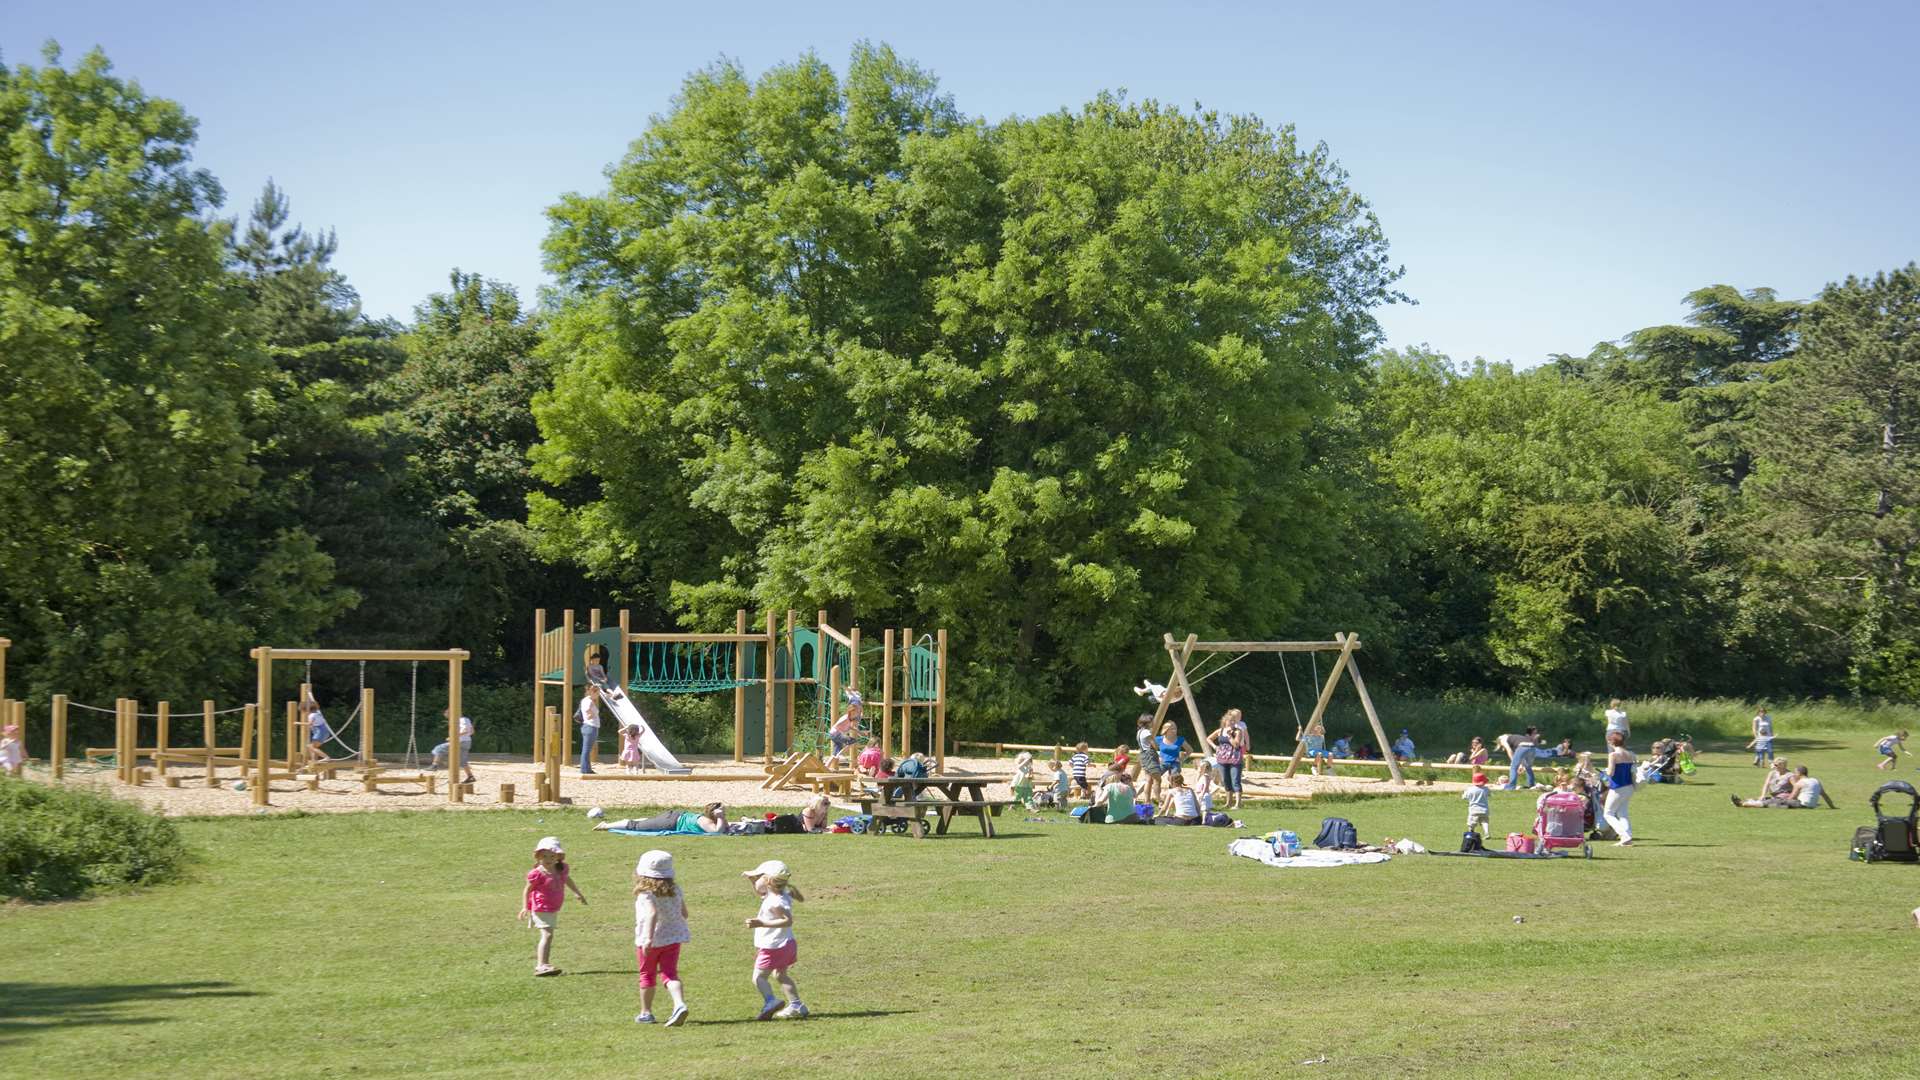 Manor Park is a great play for the kids to explore